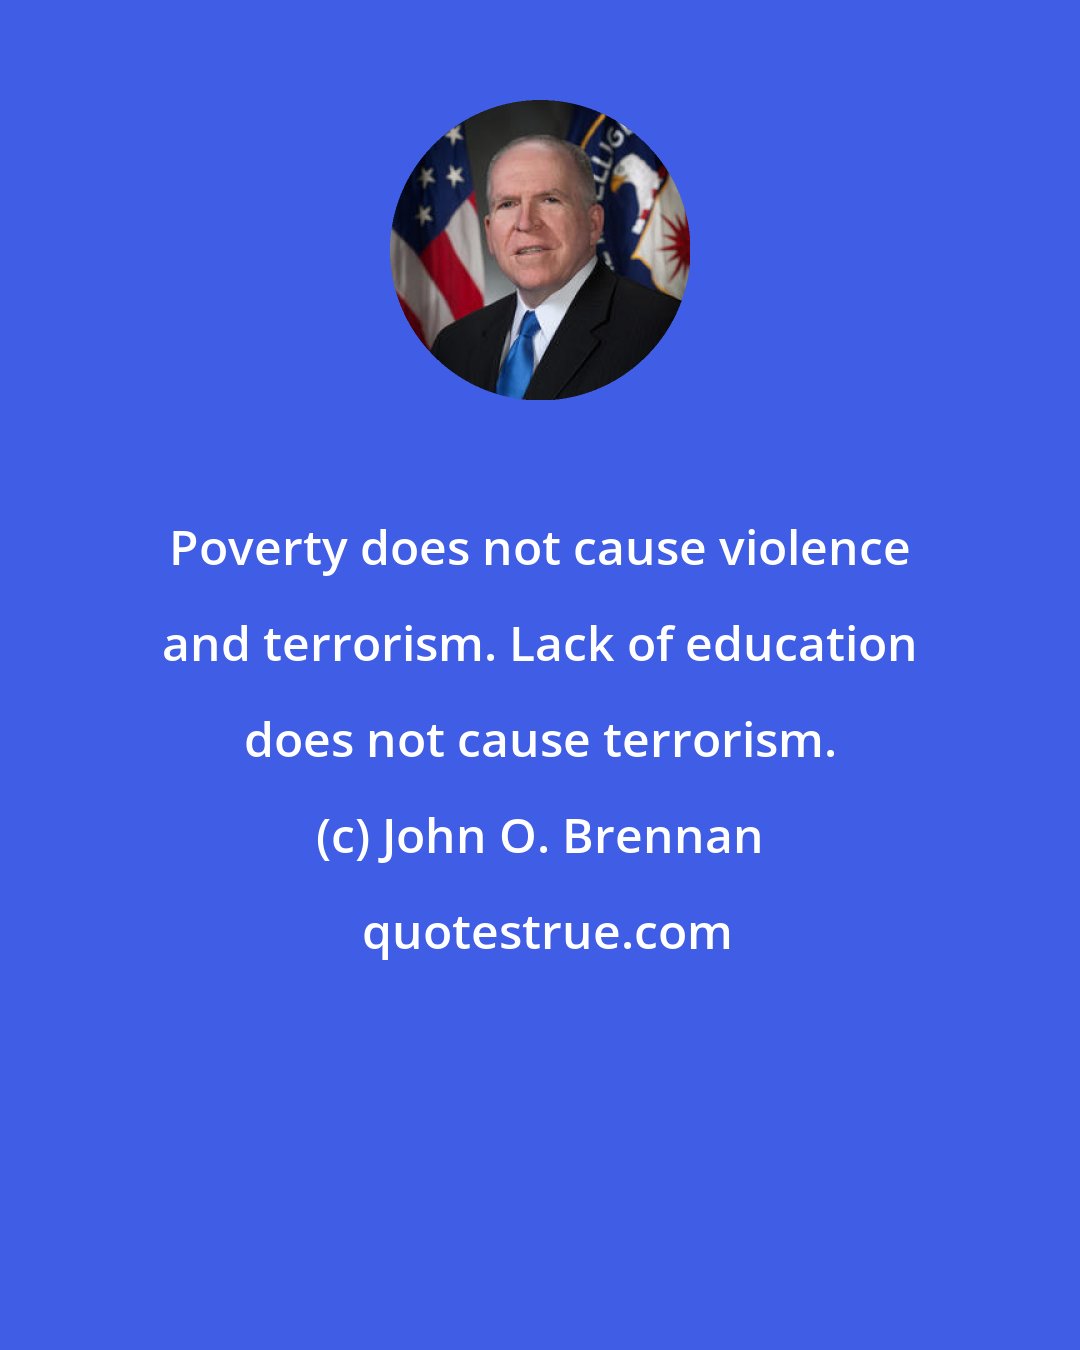 John O. Brennan: Poverty does not cause violence and terrorism. Lack of education does not cause terrorism.